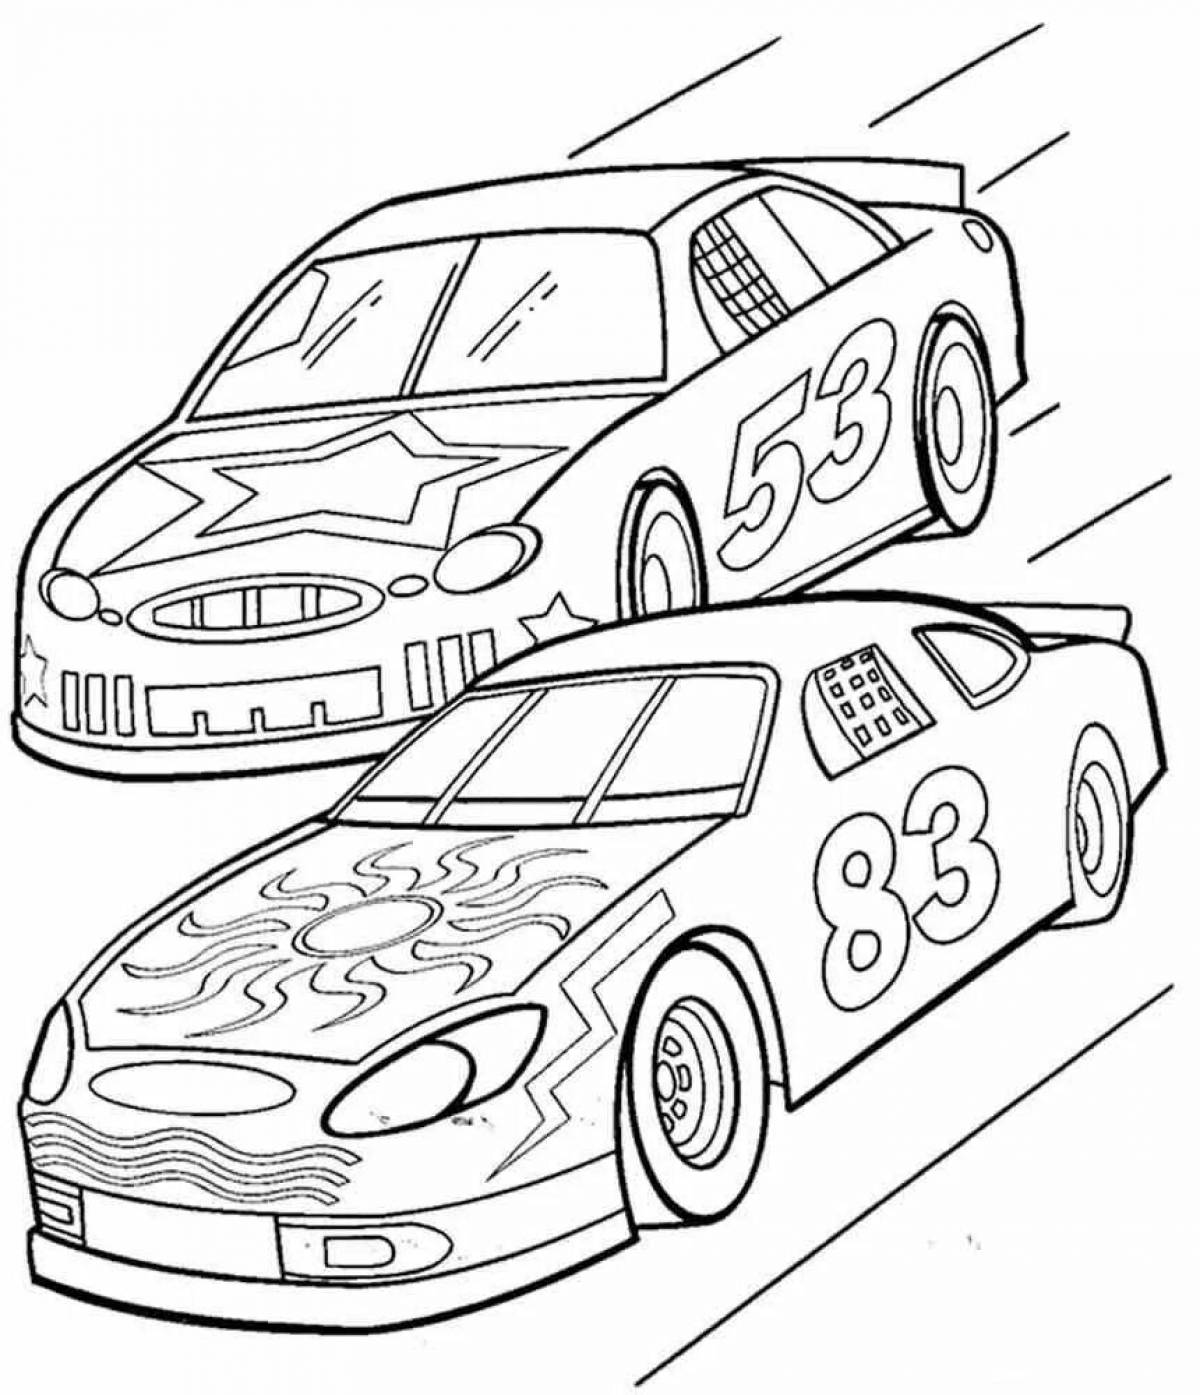 Glorious cars coloring book for children 6-7 years old